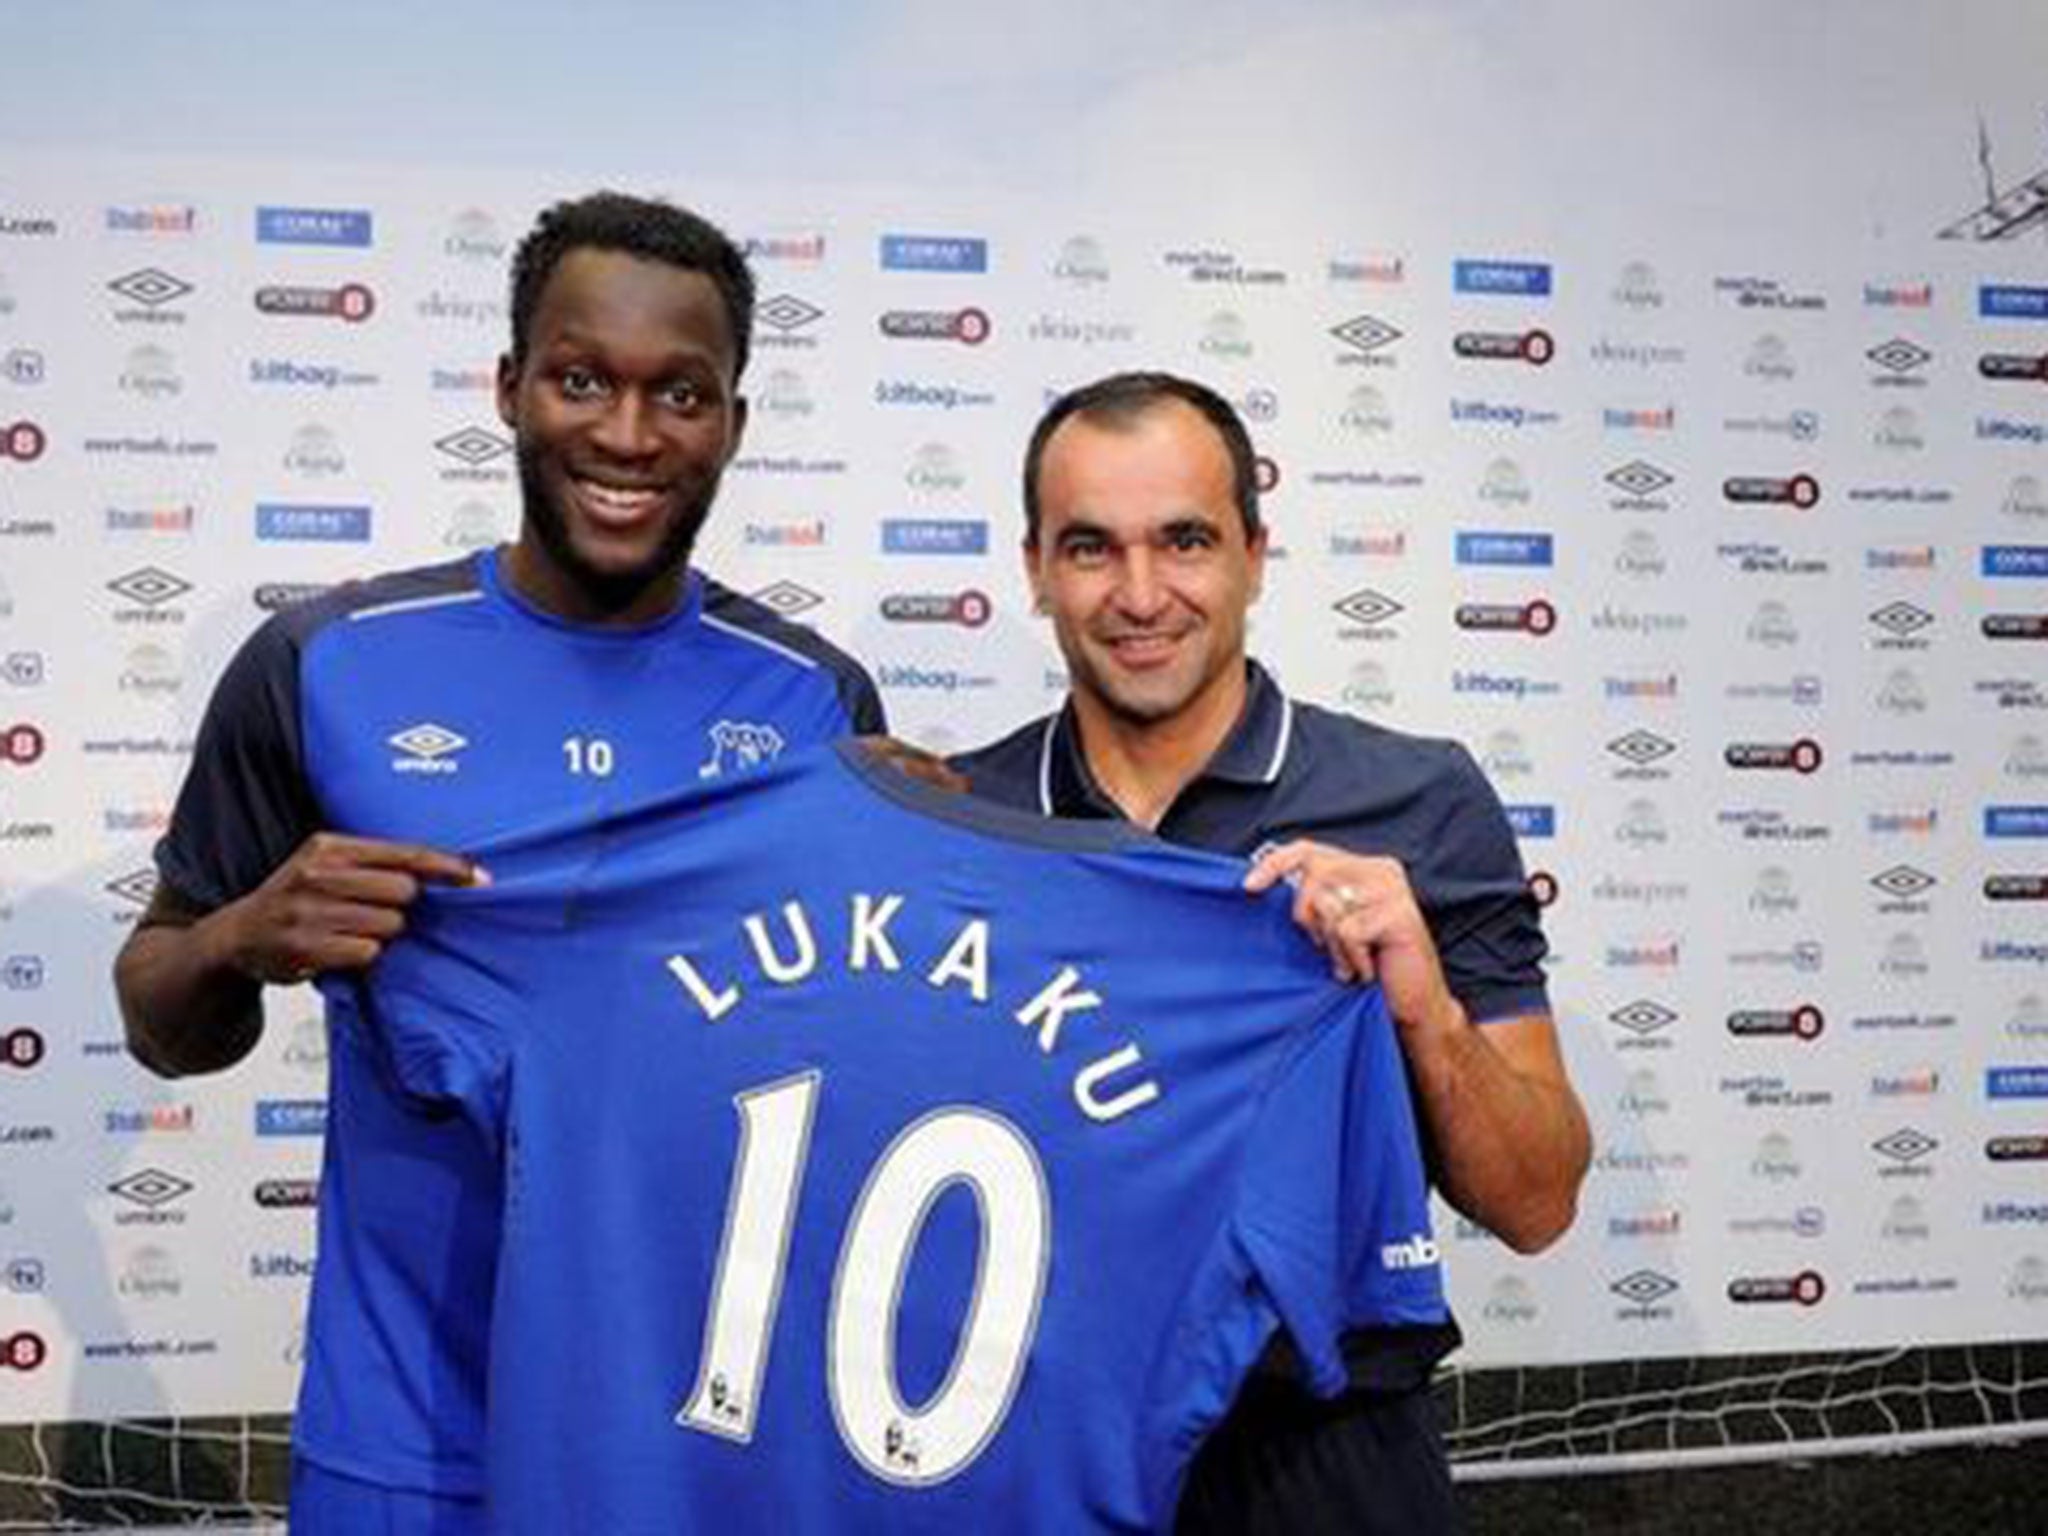 Romelu Lukaku (left) is presented by manager Roberto Martinez after joining Everton for a club-record £28m